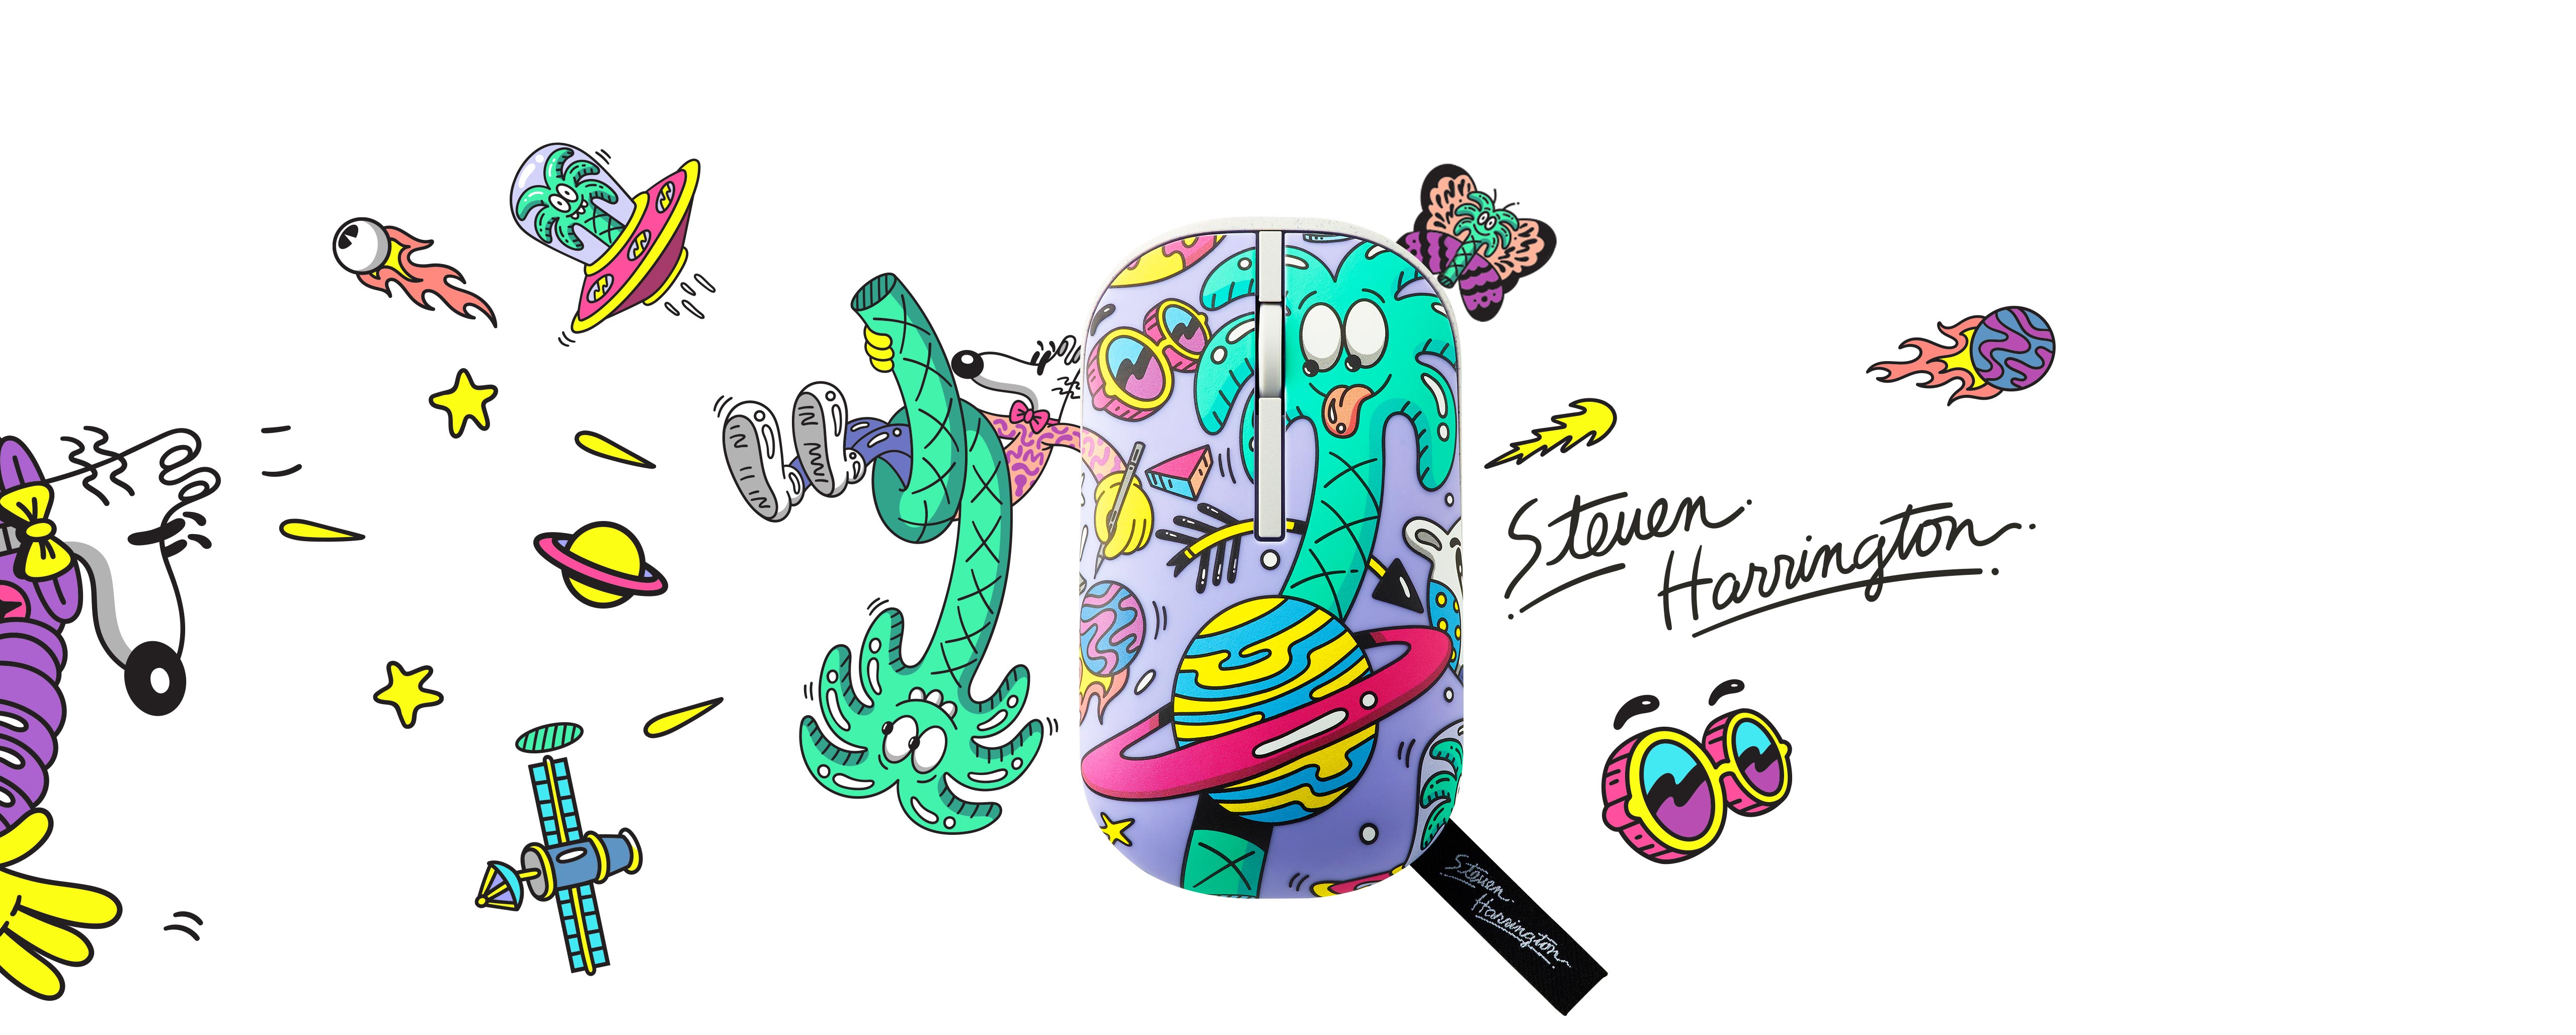 ASUS Marshmallow Mouse MD100 Steven Harrington Edition has a light purple finish and includes his iconic artwork including the palm tree, glasses and Saturn. His other works like Mello, butterfly, and stars, along with his signature, can also be found on the page.